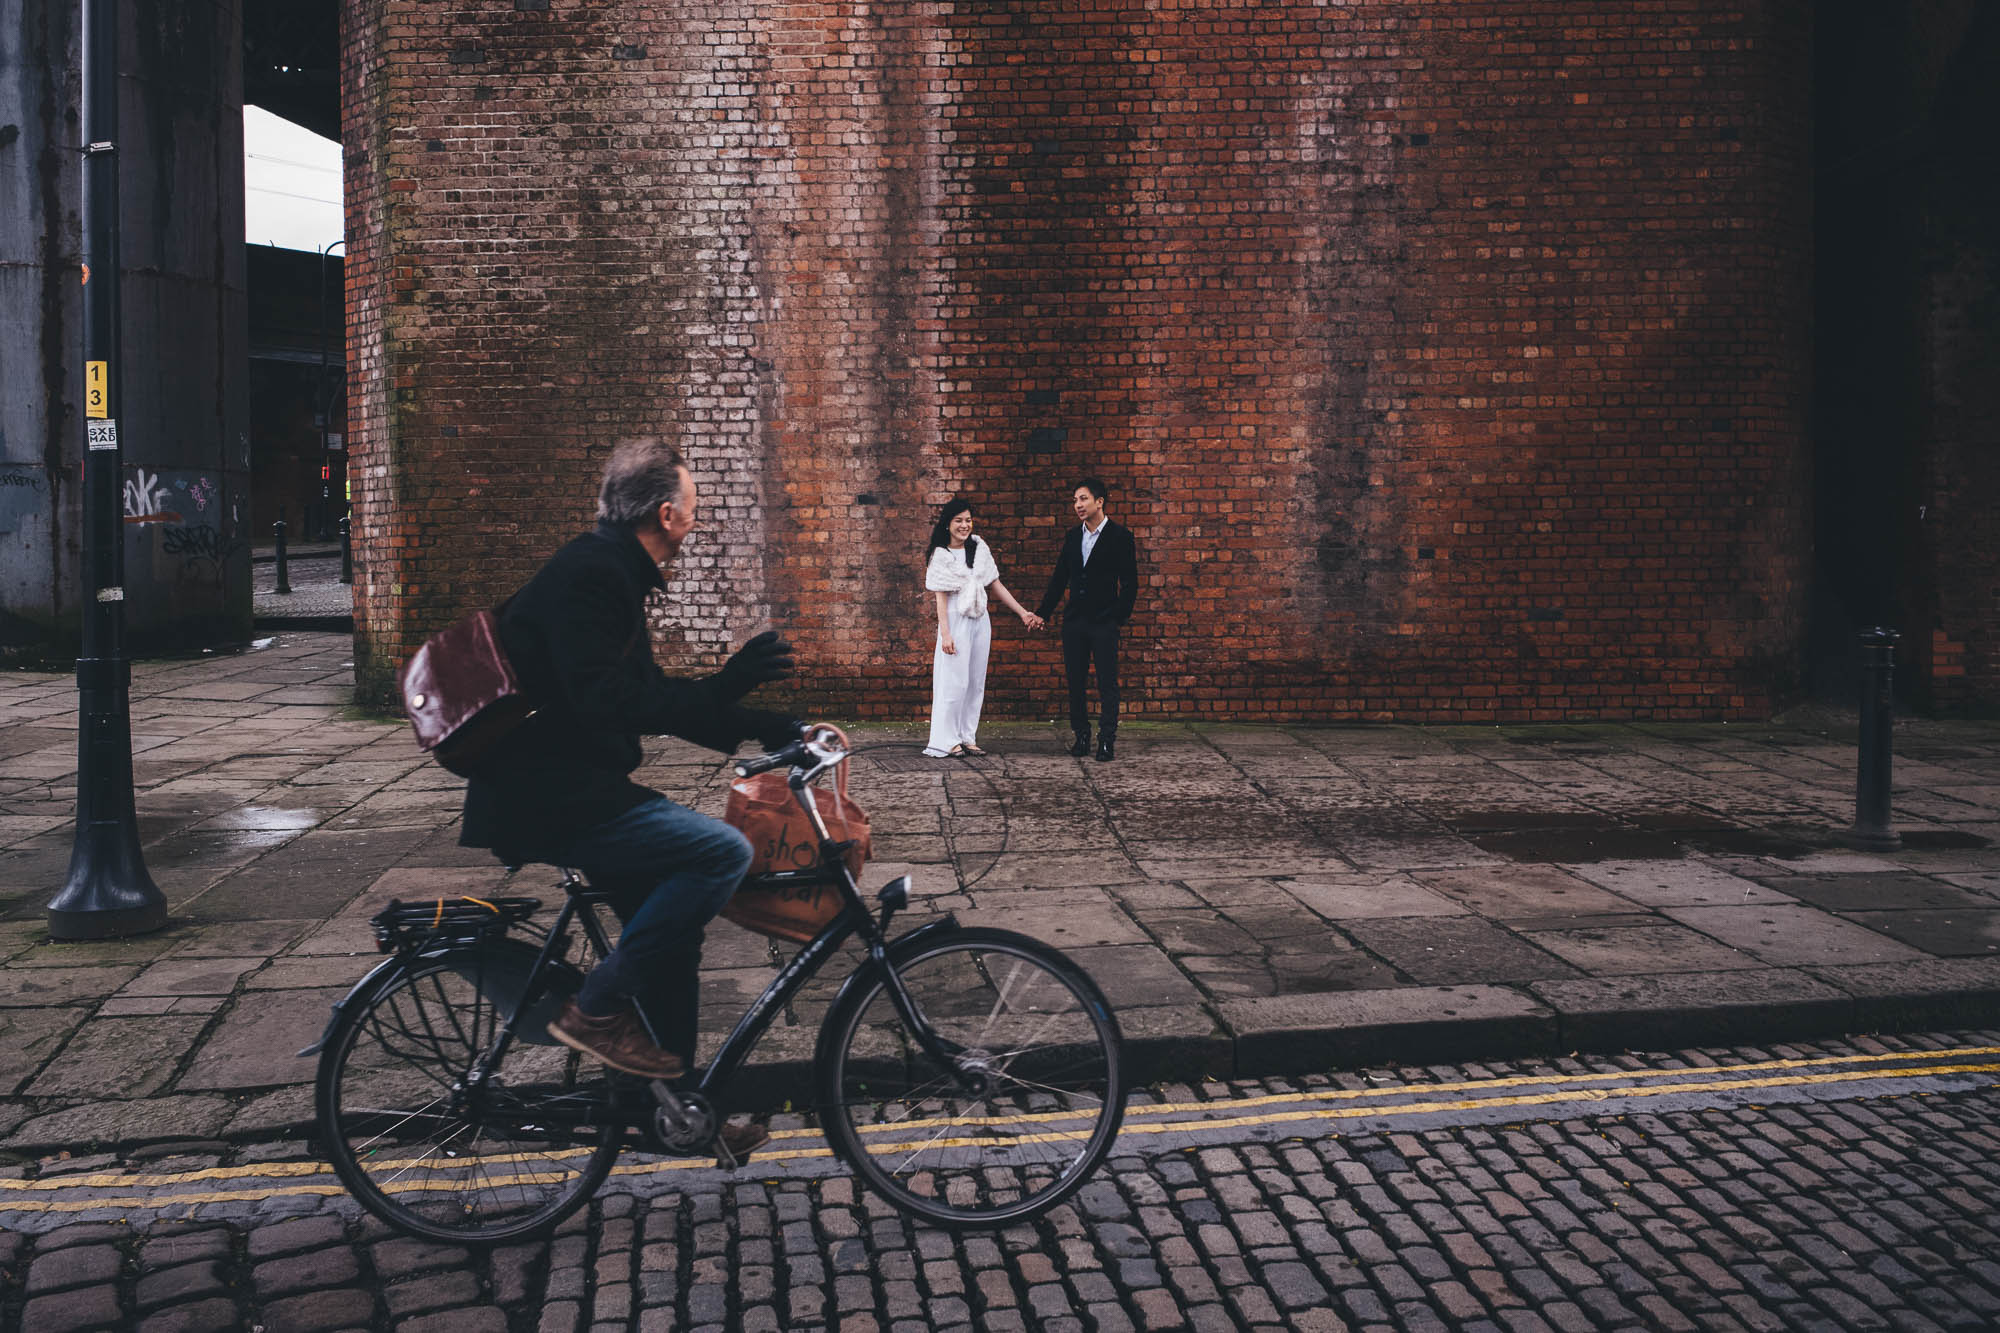 cyclist photo bombs a couple against a brick wall in castlefield manchester